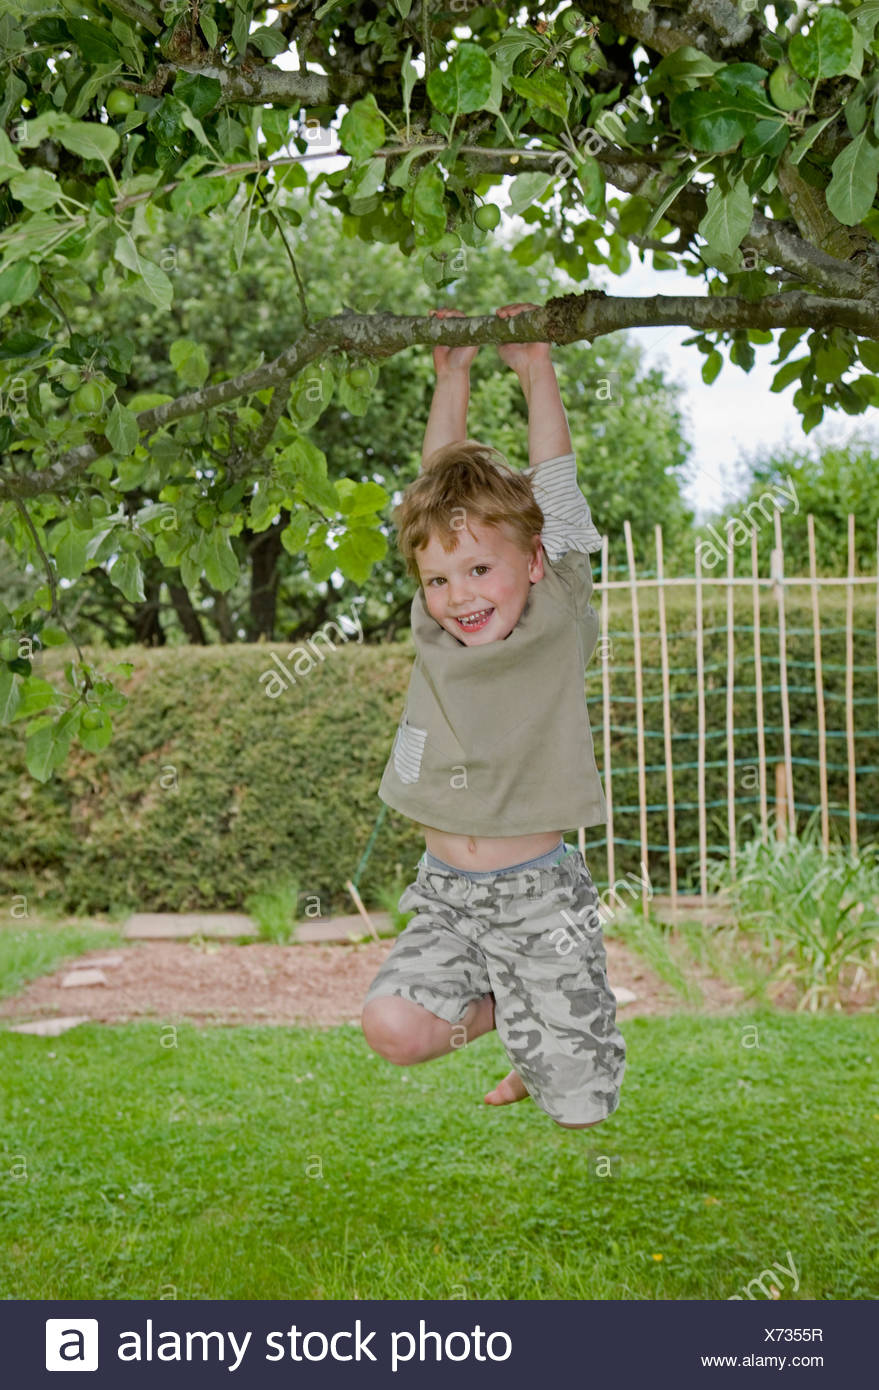 Boy Hanging Hanging From A Tree Branch Stock Photo - Image 